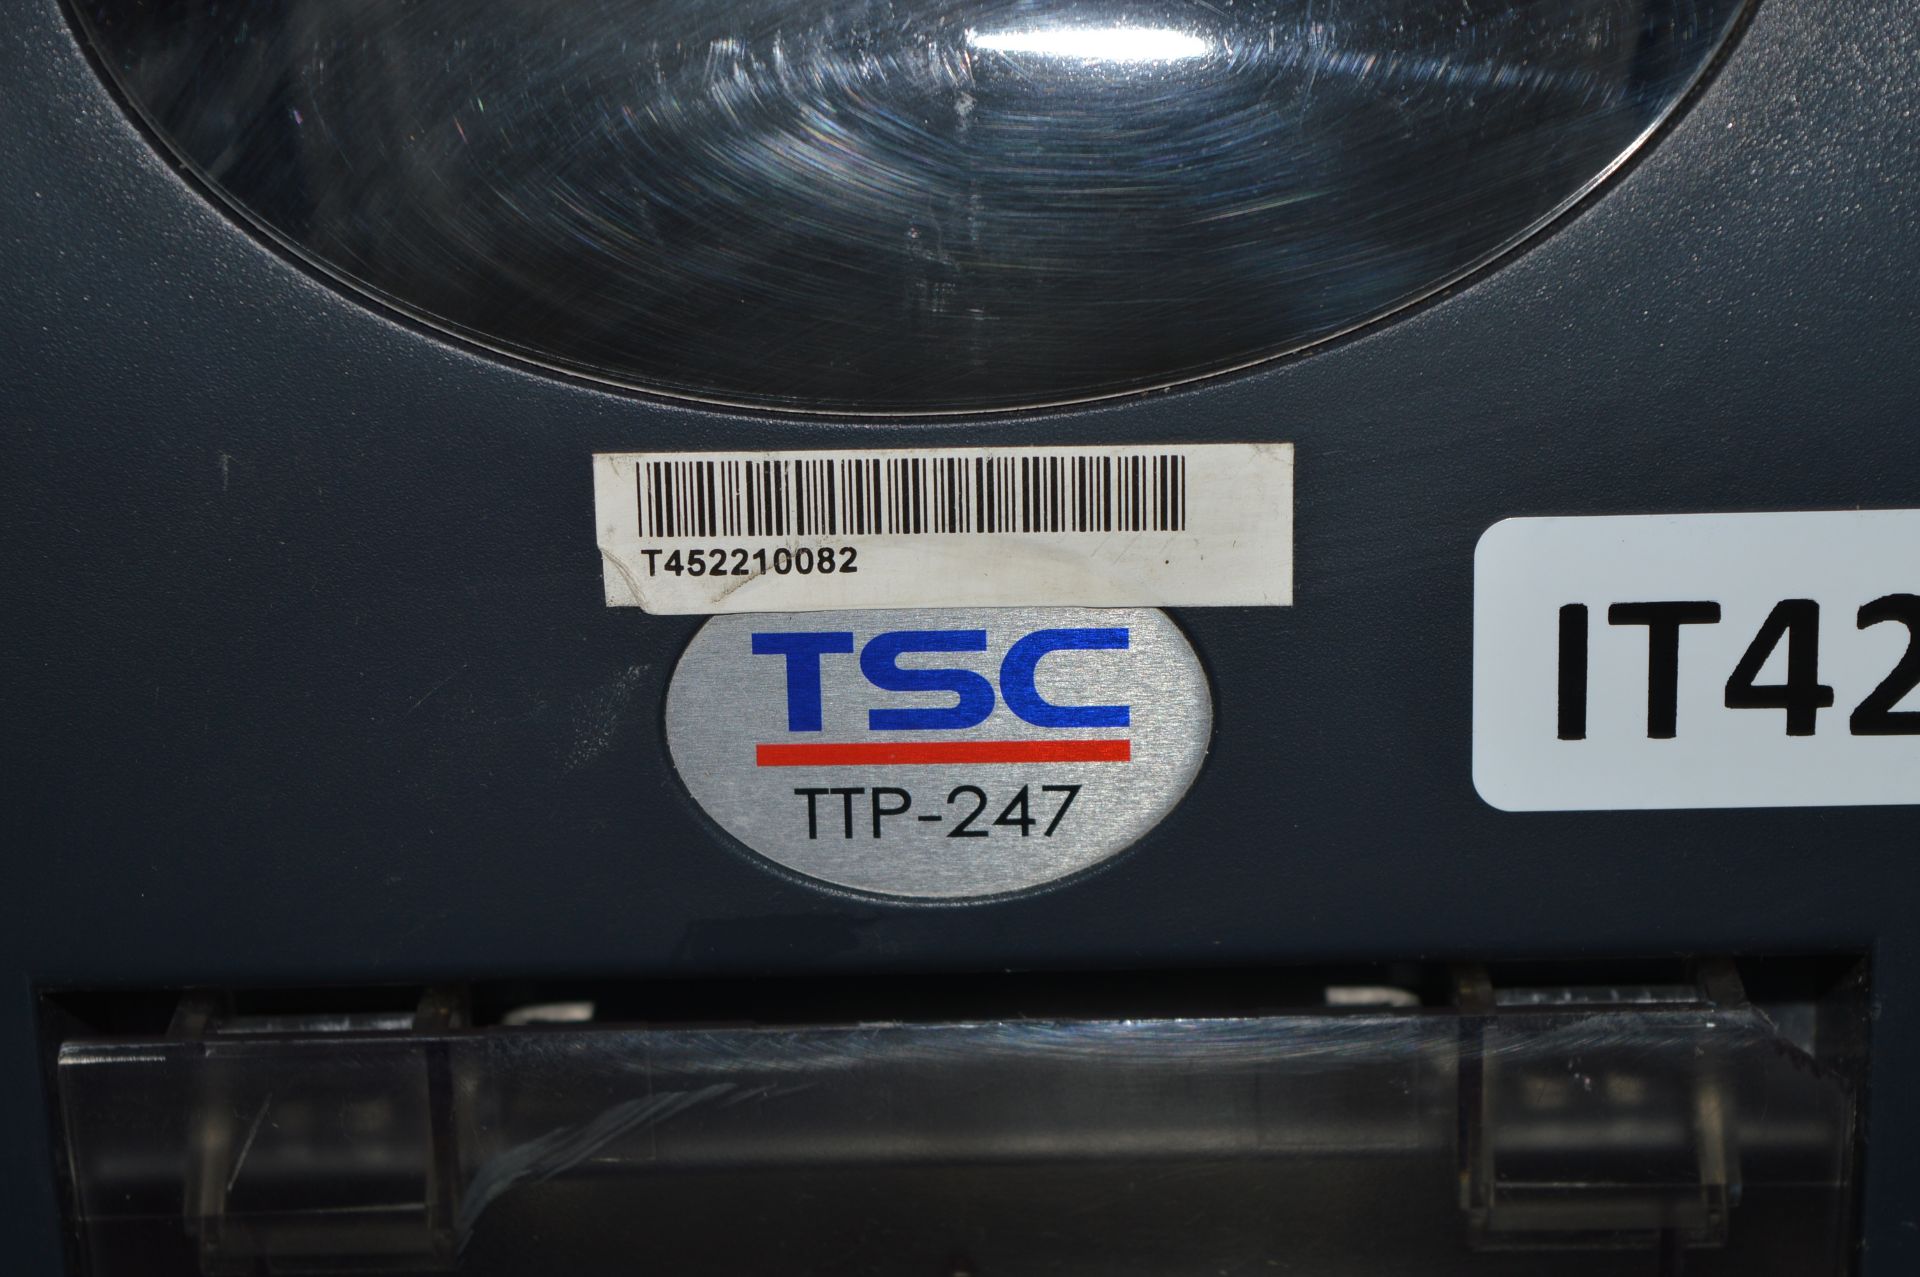 1 x TSC TTP-247 Thermal Label Printer - Includes Power Adaptor - CL011 - Ref IT420 - Location: - Image 2 of 7